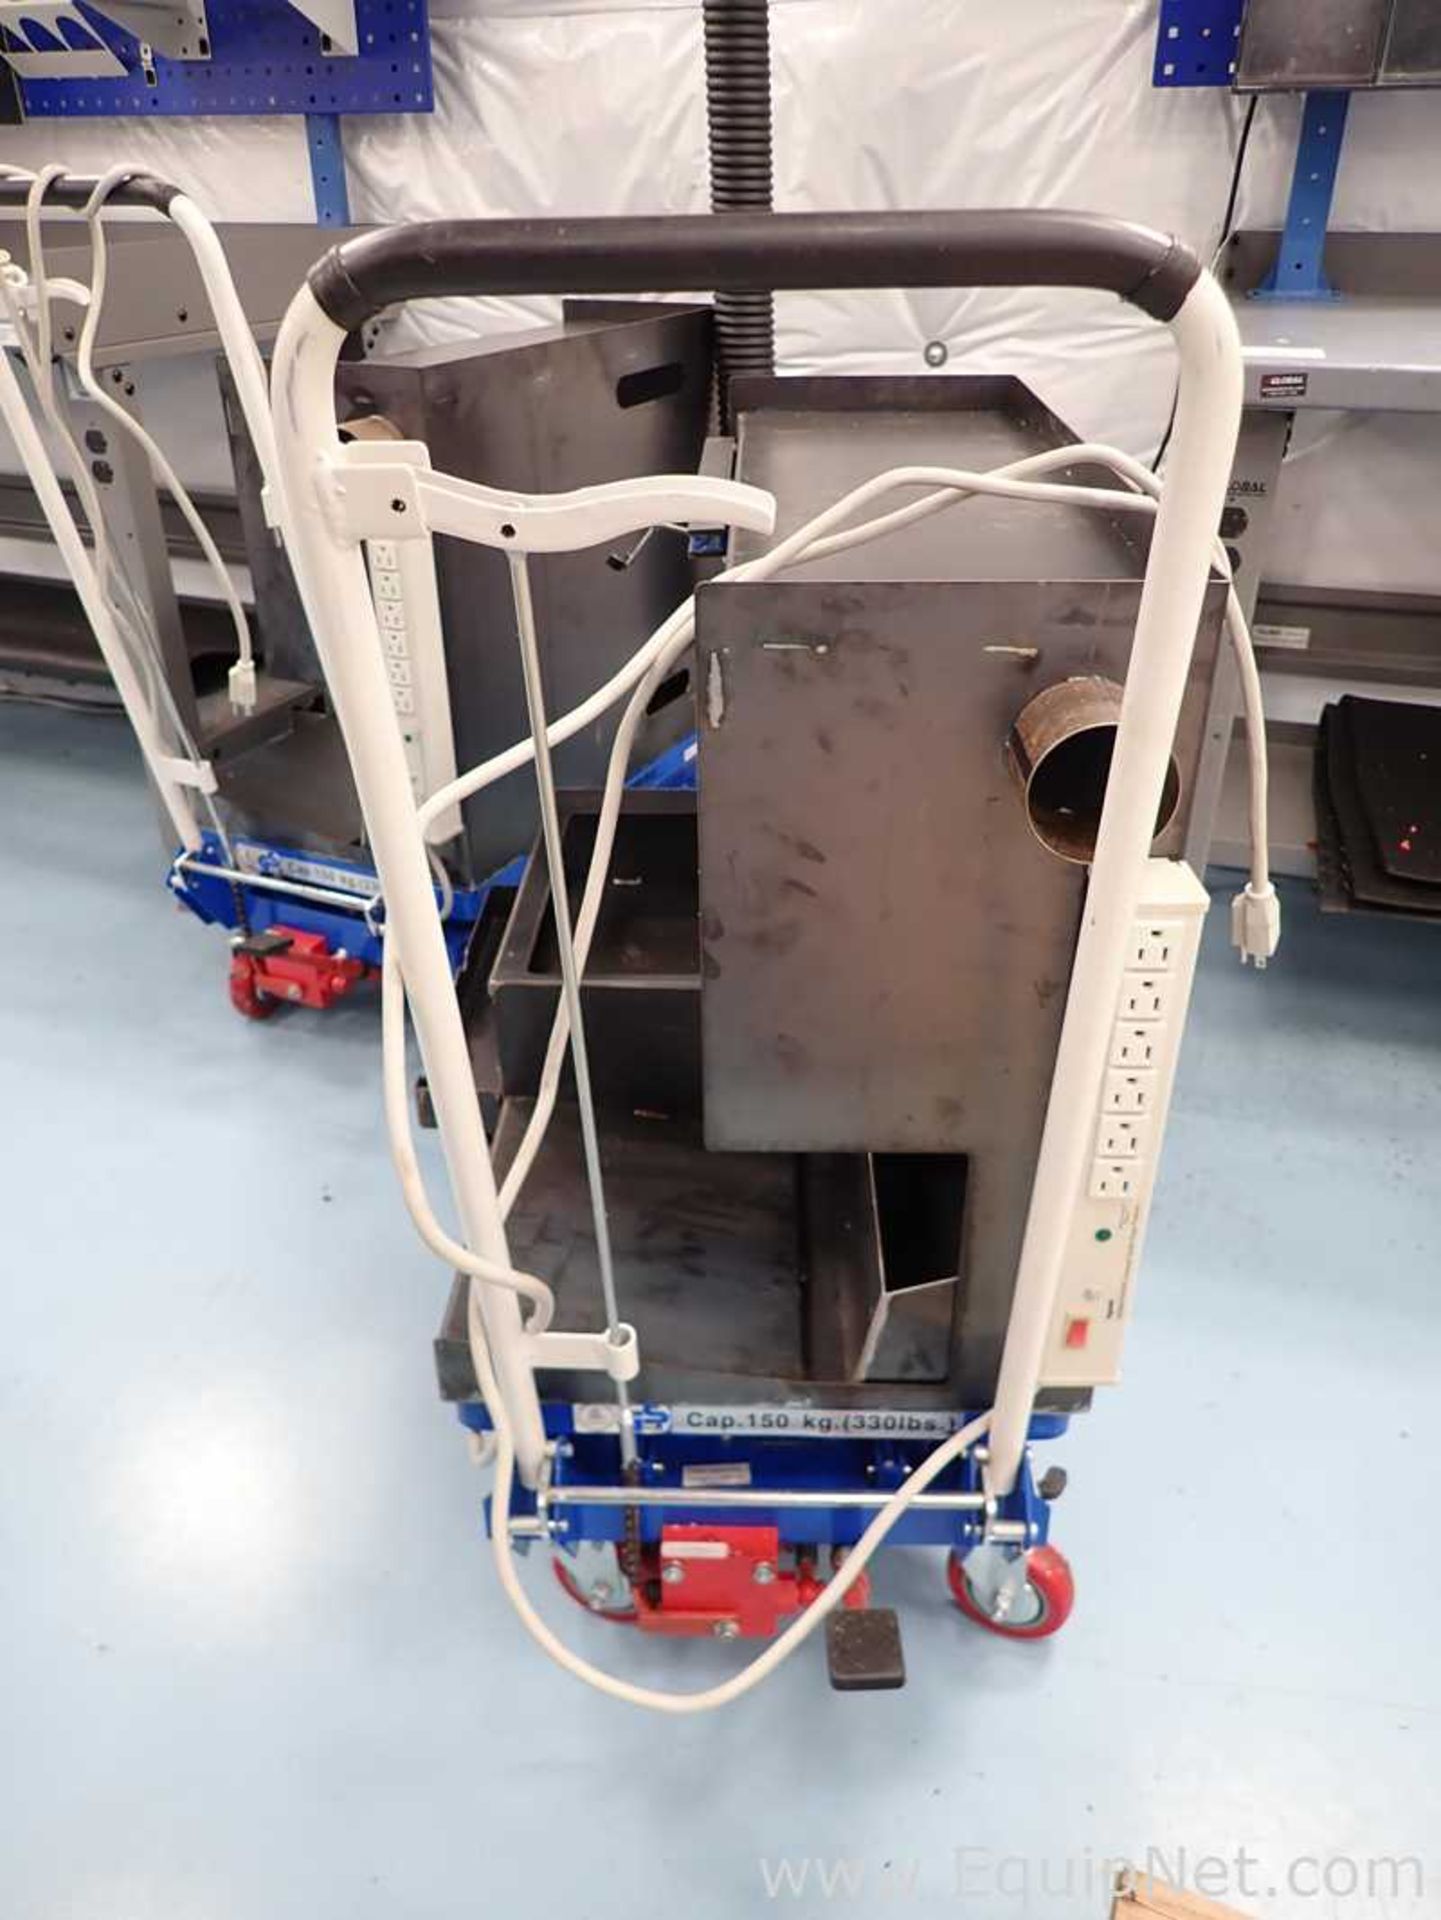 Lot of 2 Global Industrial Scissor Lifts with Melting Stations - Image 2 of 4